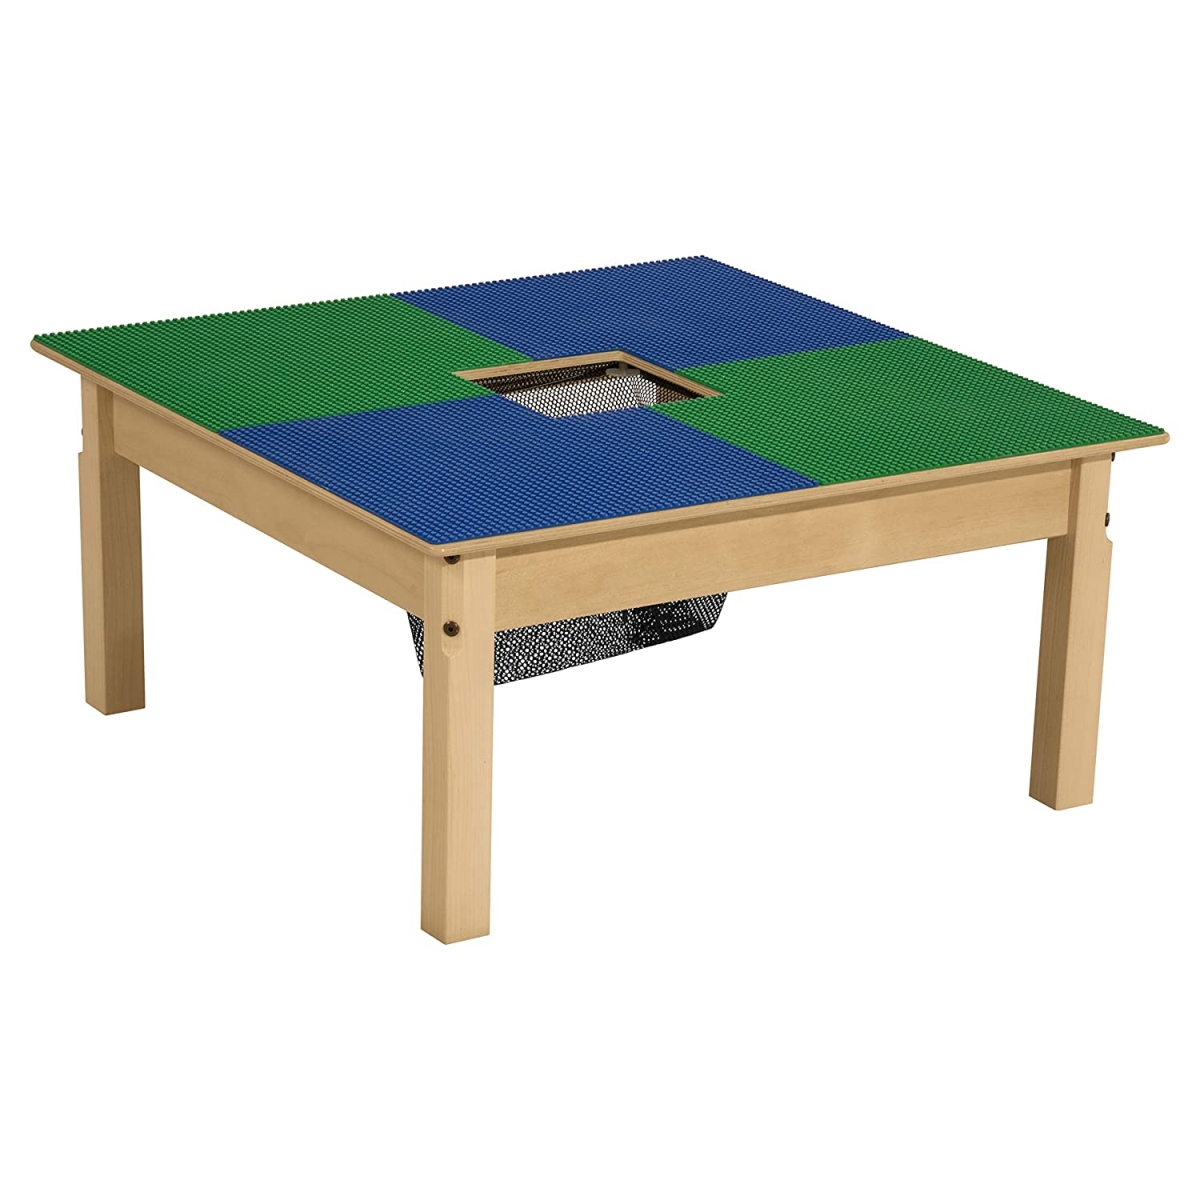 Tp3131sgn16-bg 16 In. Lego Compatible Table With Legs, Blue & Green - Square